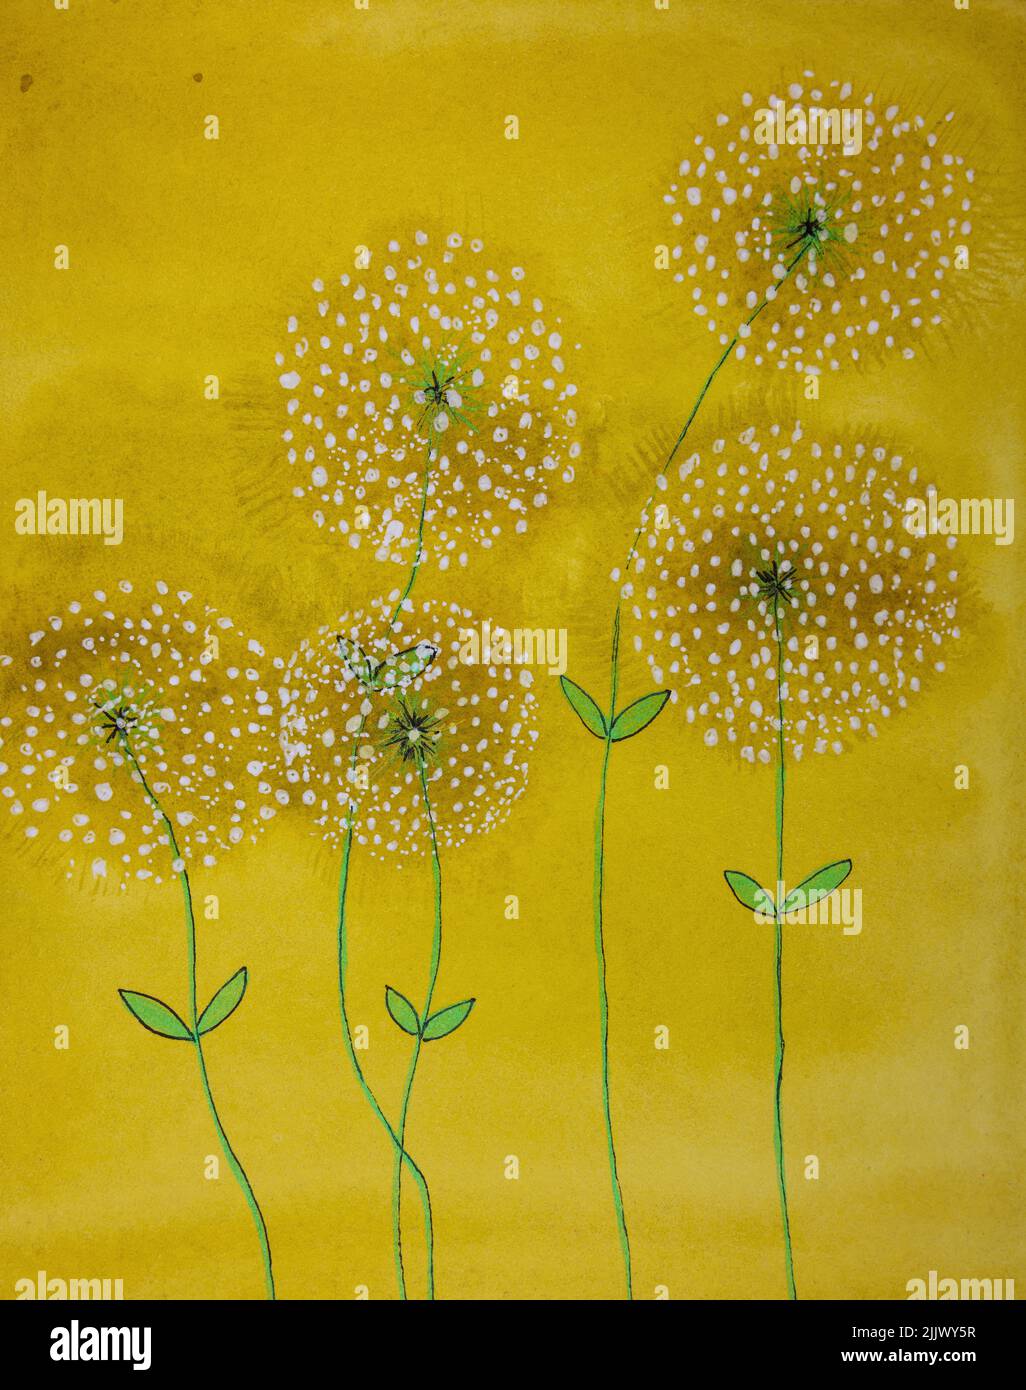 Dandelion on a gold background. The dabbing technique near the edges gives a soft focus effect due to the altered surface roughness of the paper. Stock Photo